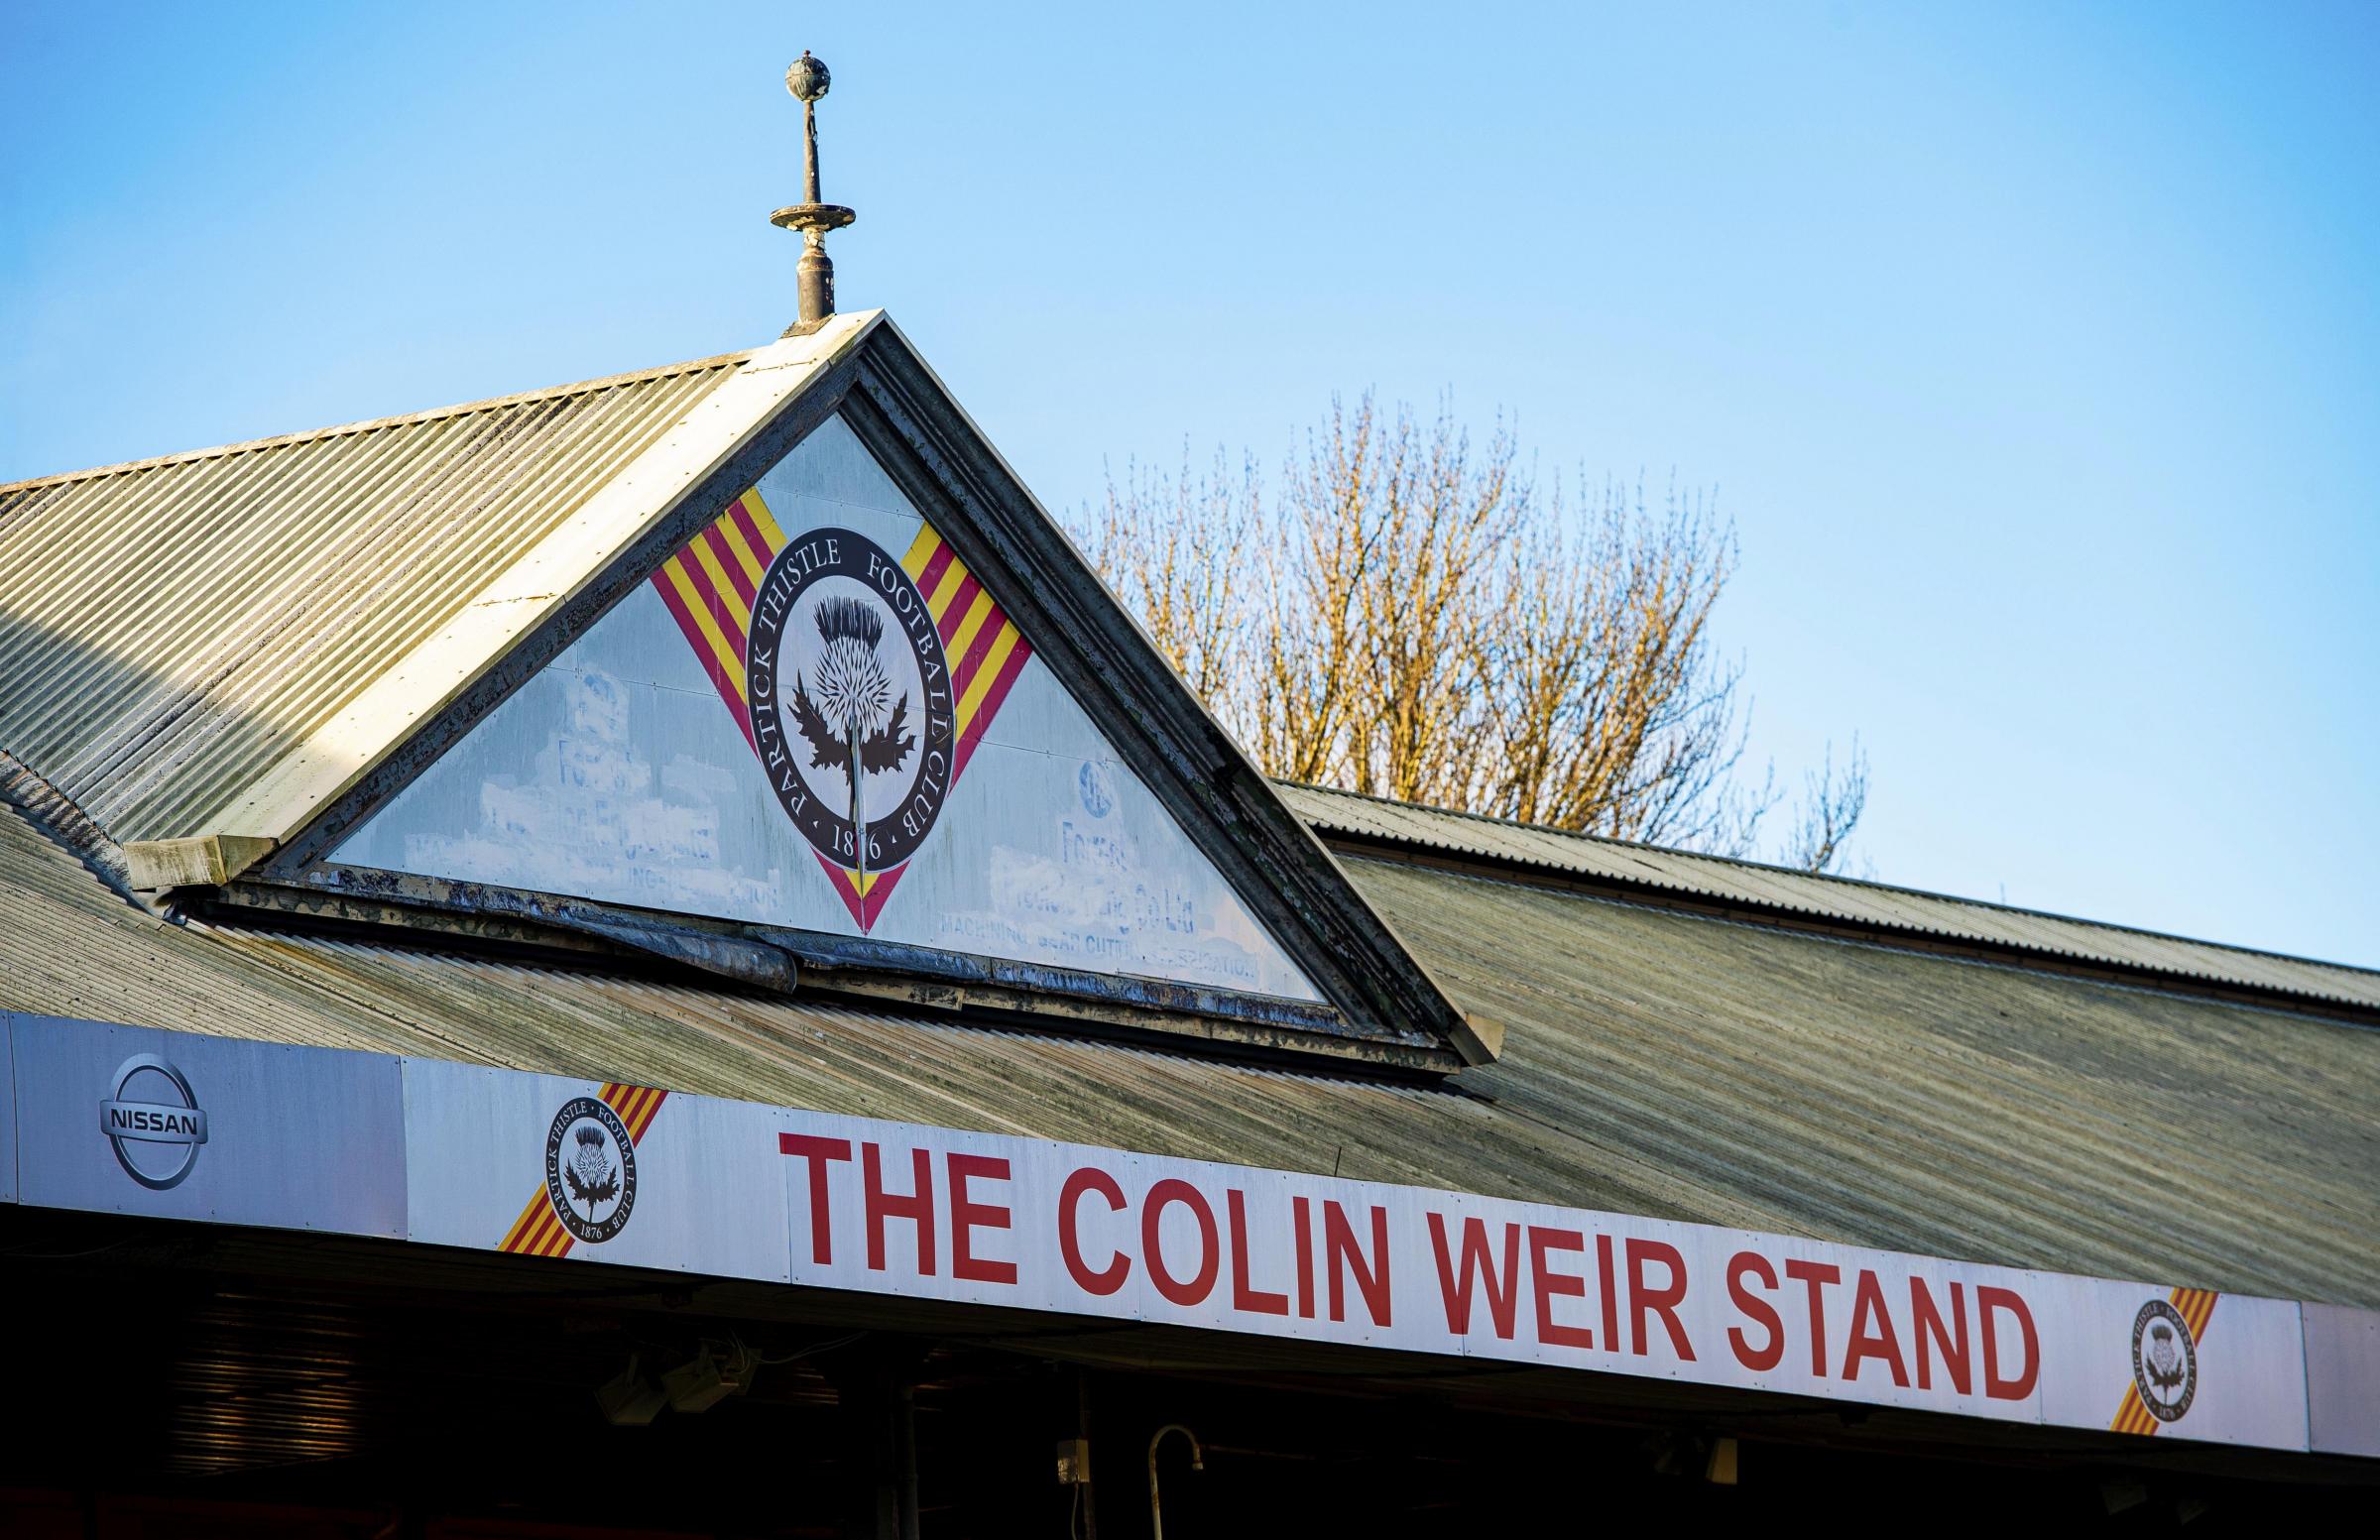 Partick Thistle fans launch scathing response in wake of fan ownership row